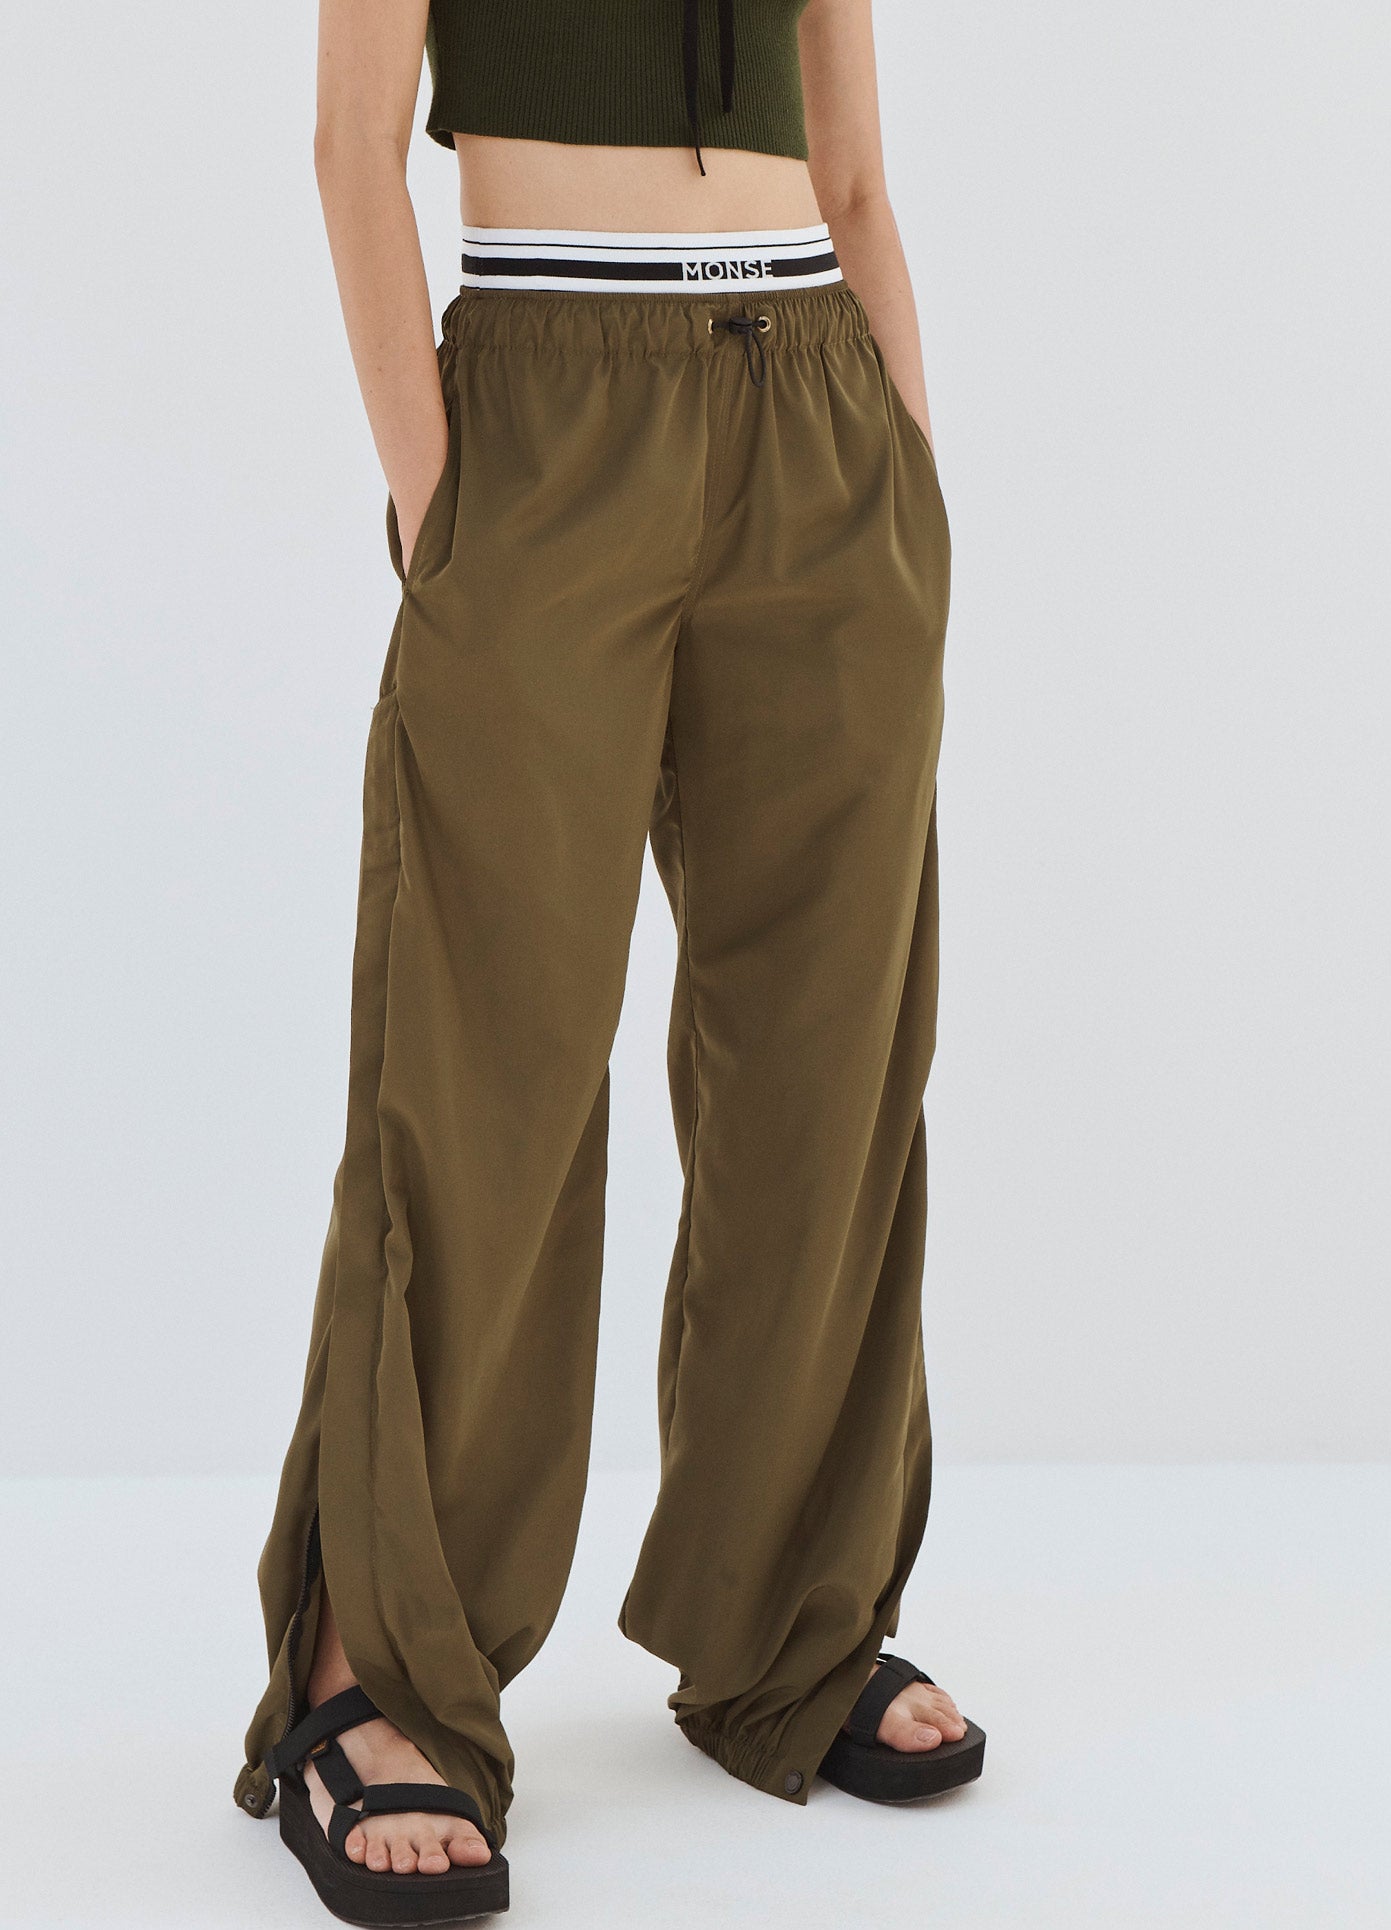 monse double wastband track pants olive on model pants detailed front view